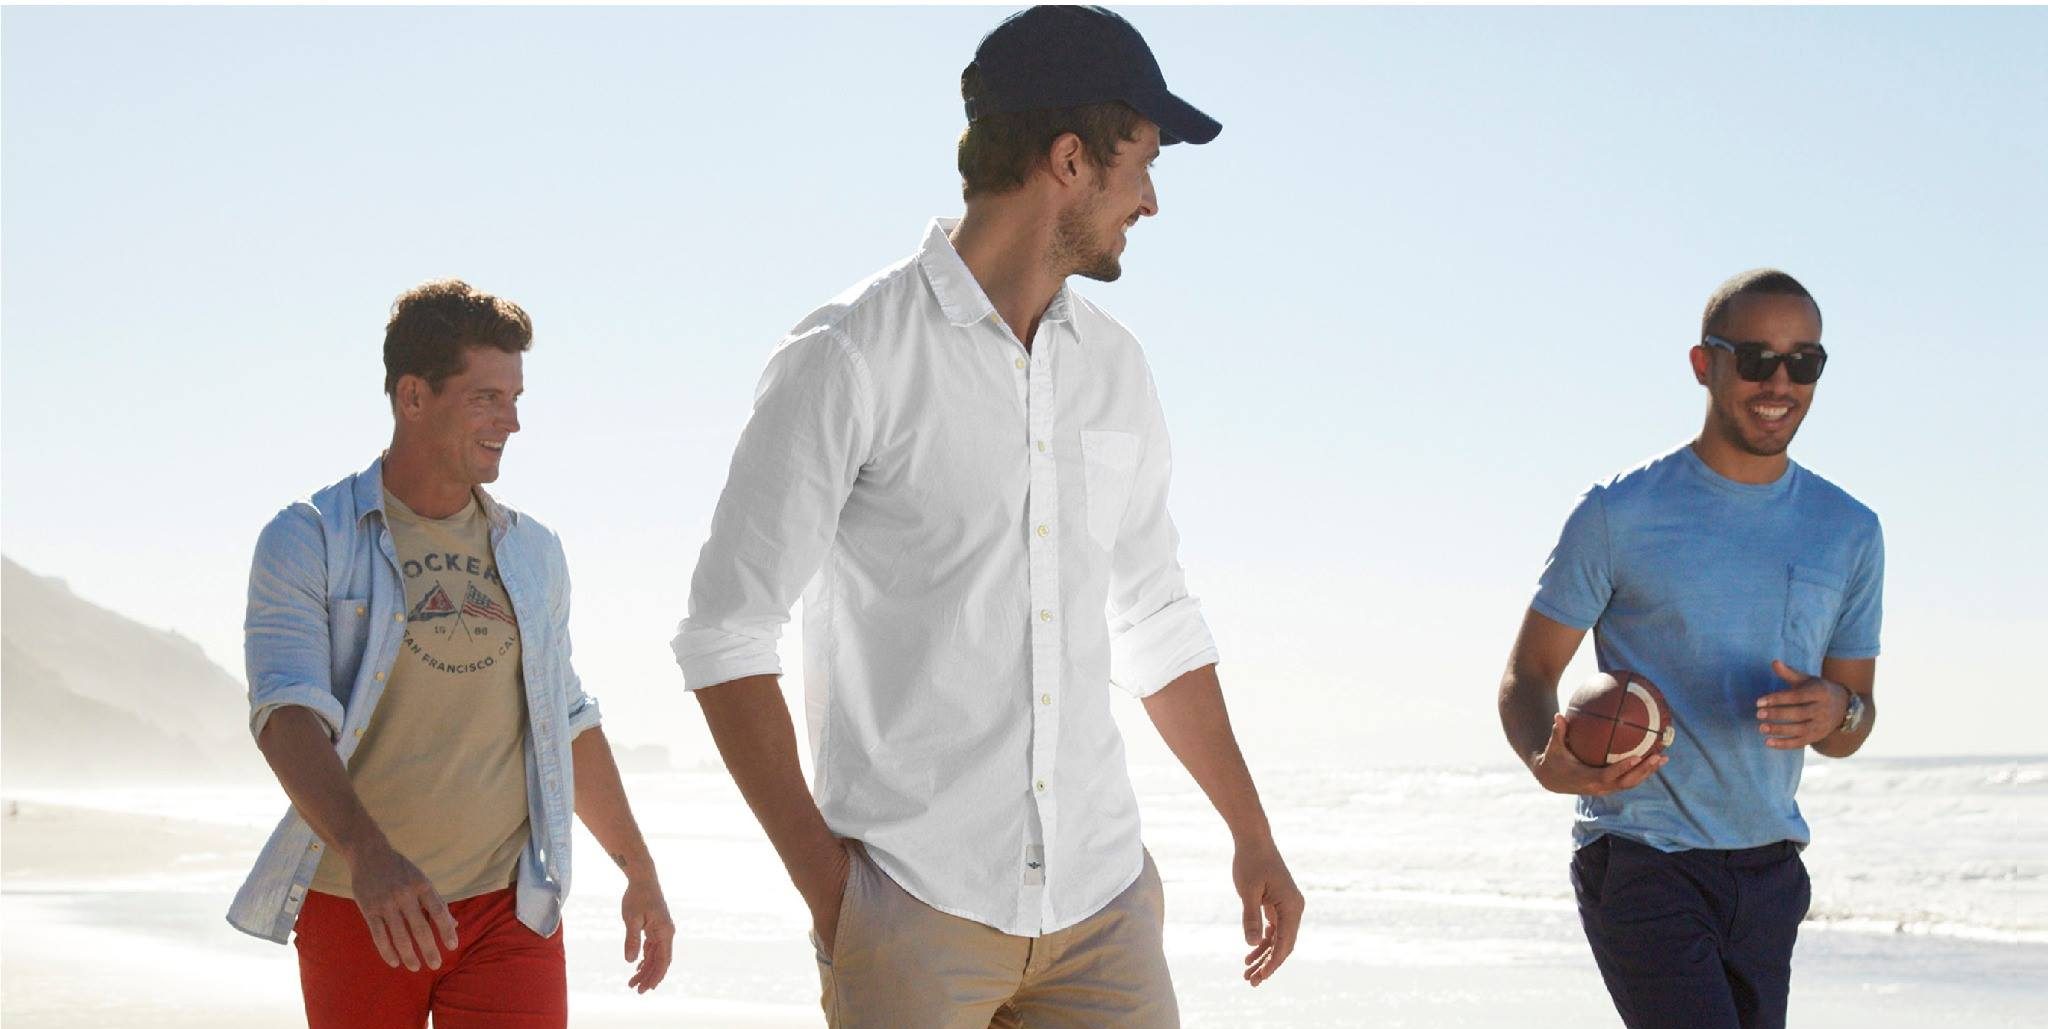 Dockers Singapore Like Facebook Page to Enjoy $40 Off Promotion ends 21 ...